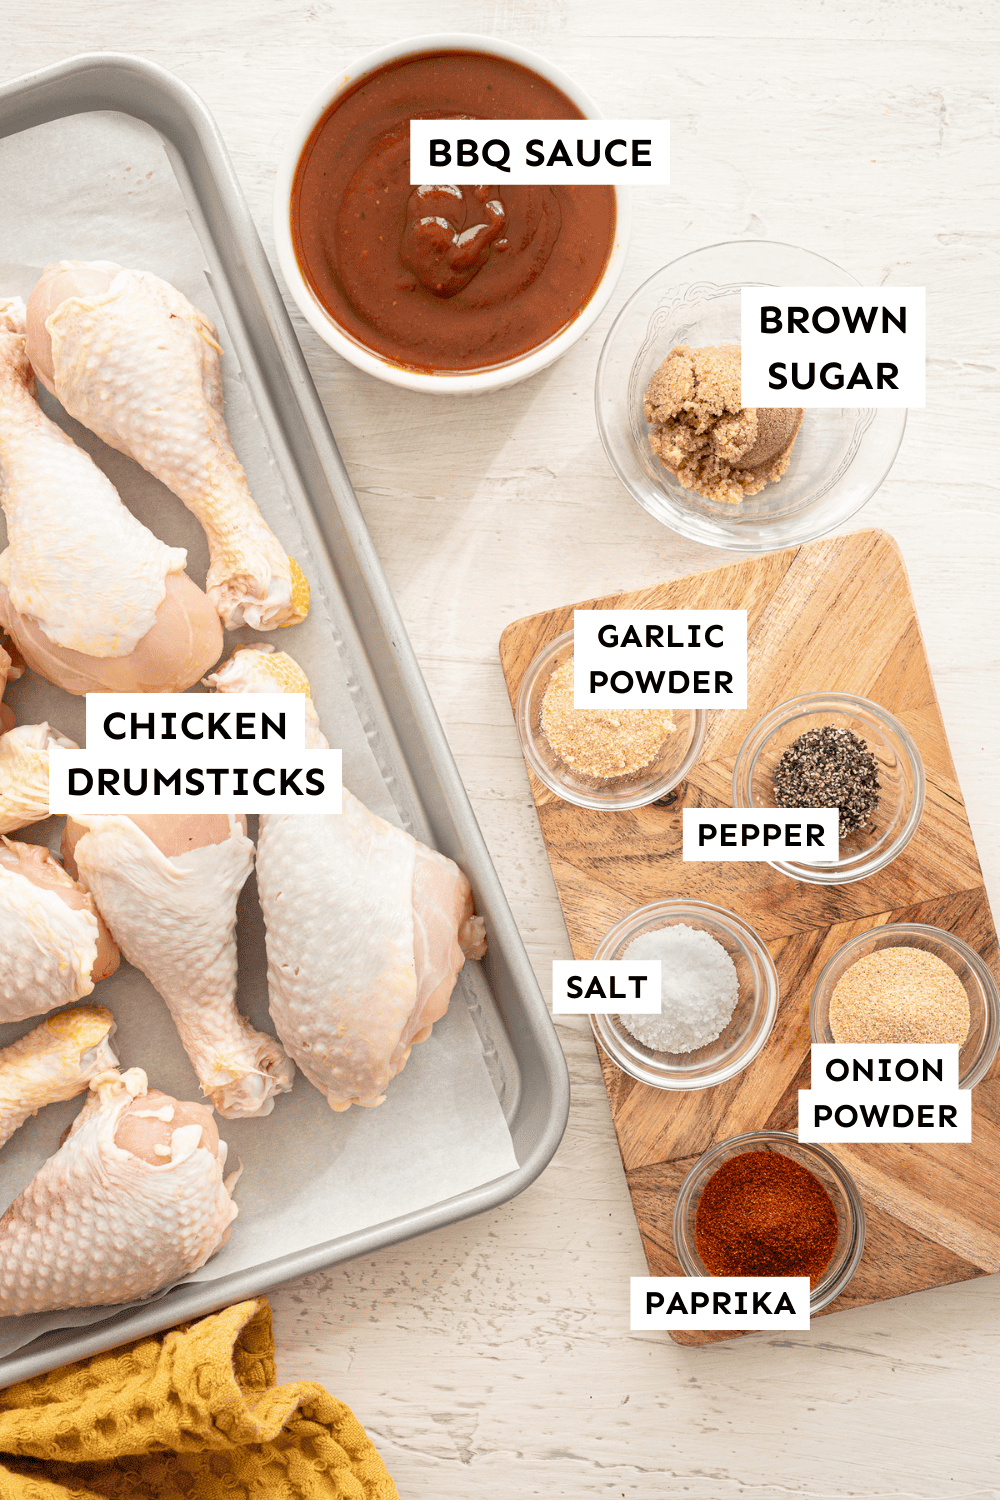 Ingredients for BBQ chicken drumsticks measured out and labeled.